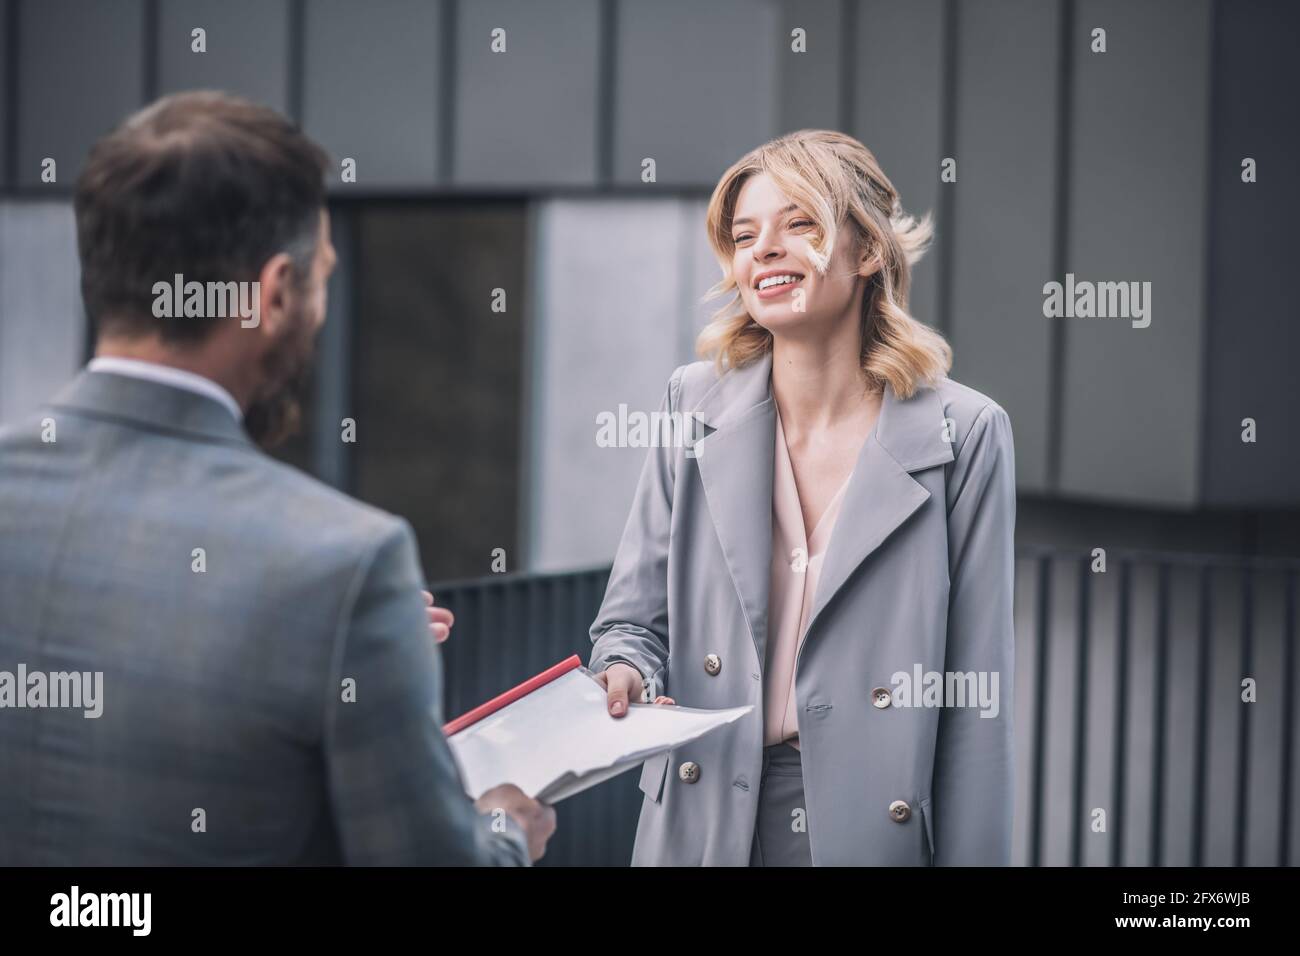 Man handing over documents to smiling business woman Stock Photo